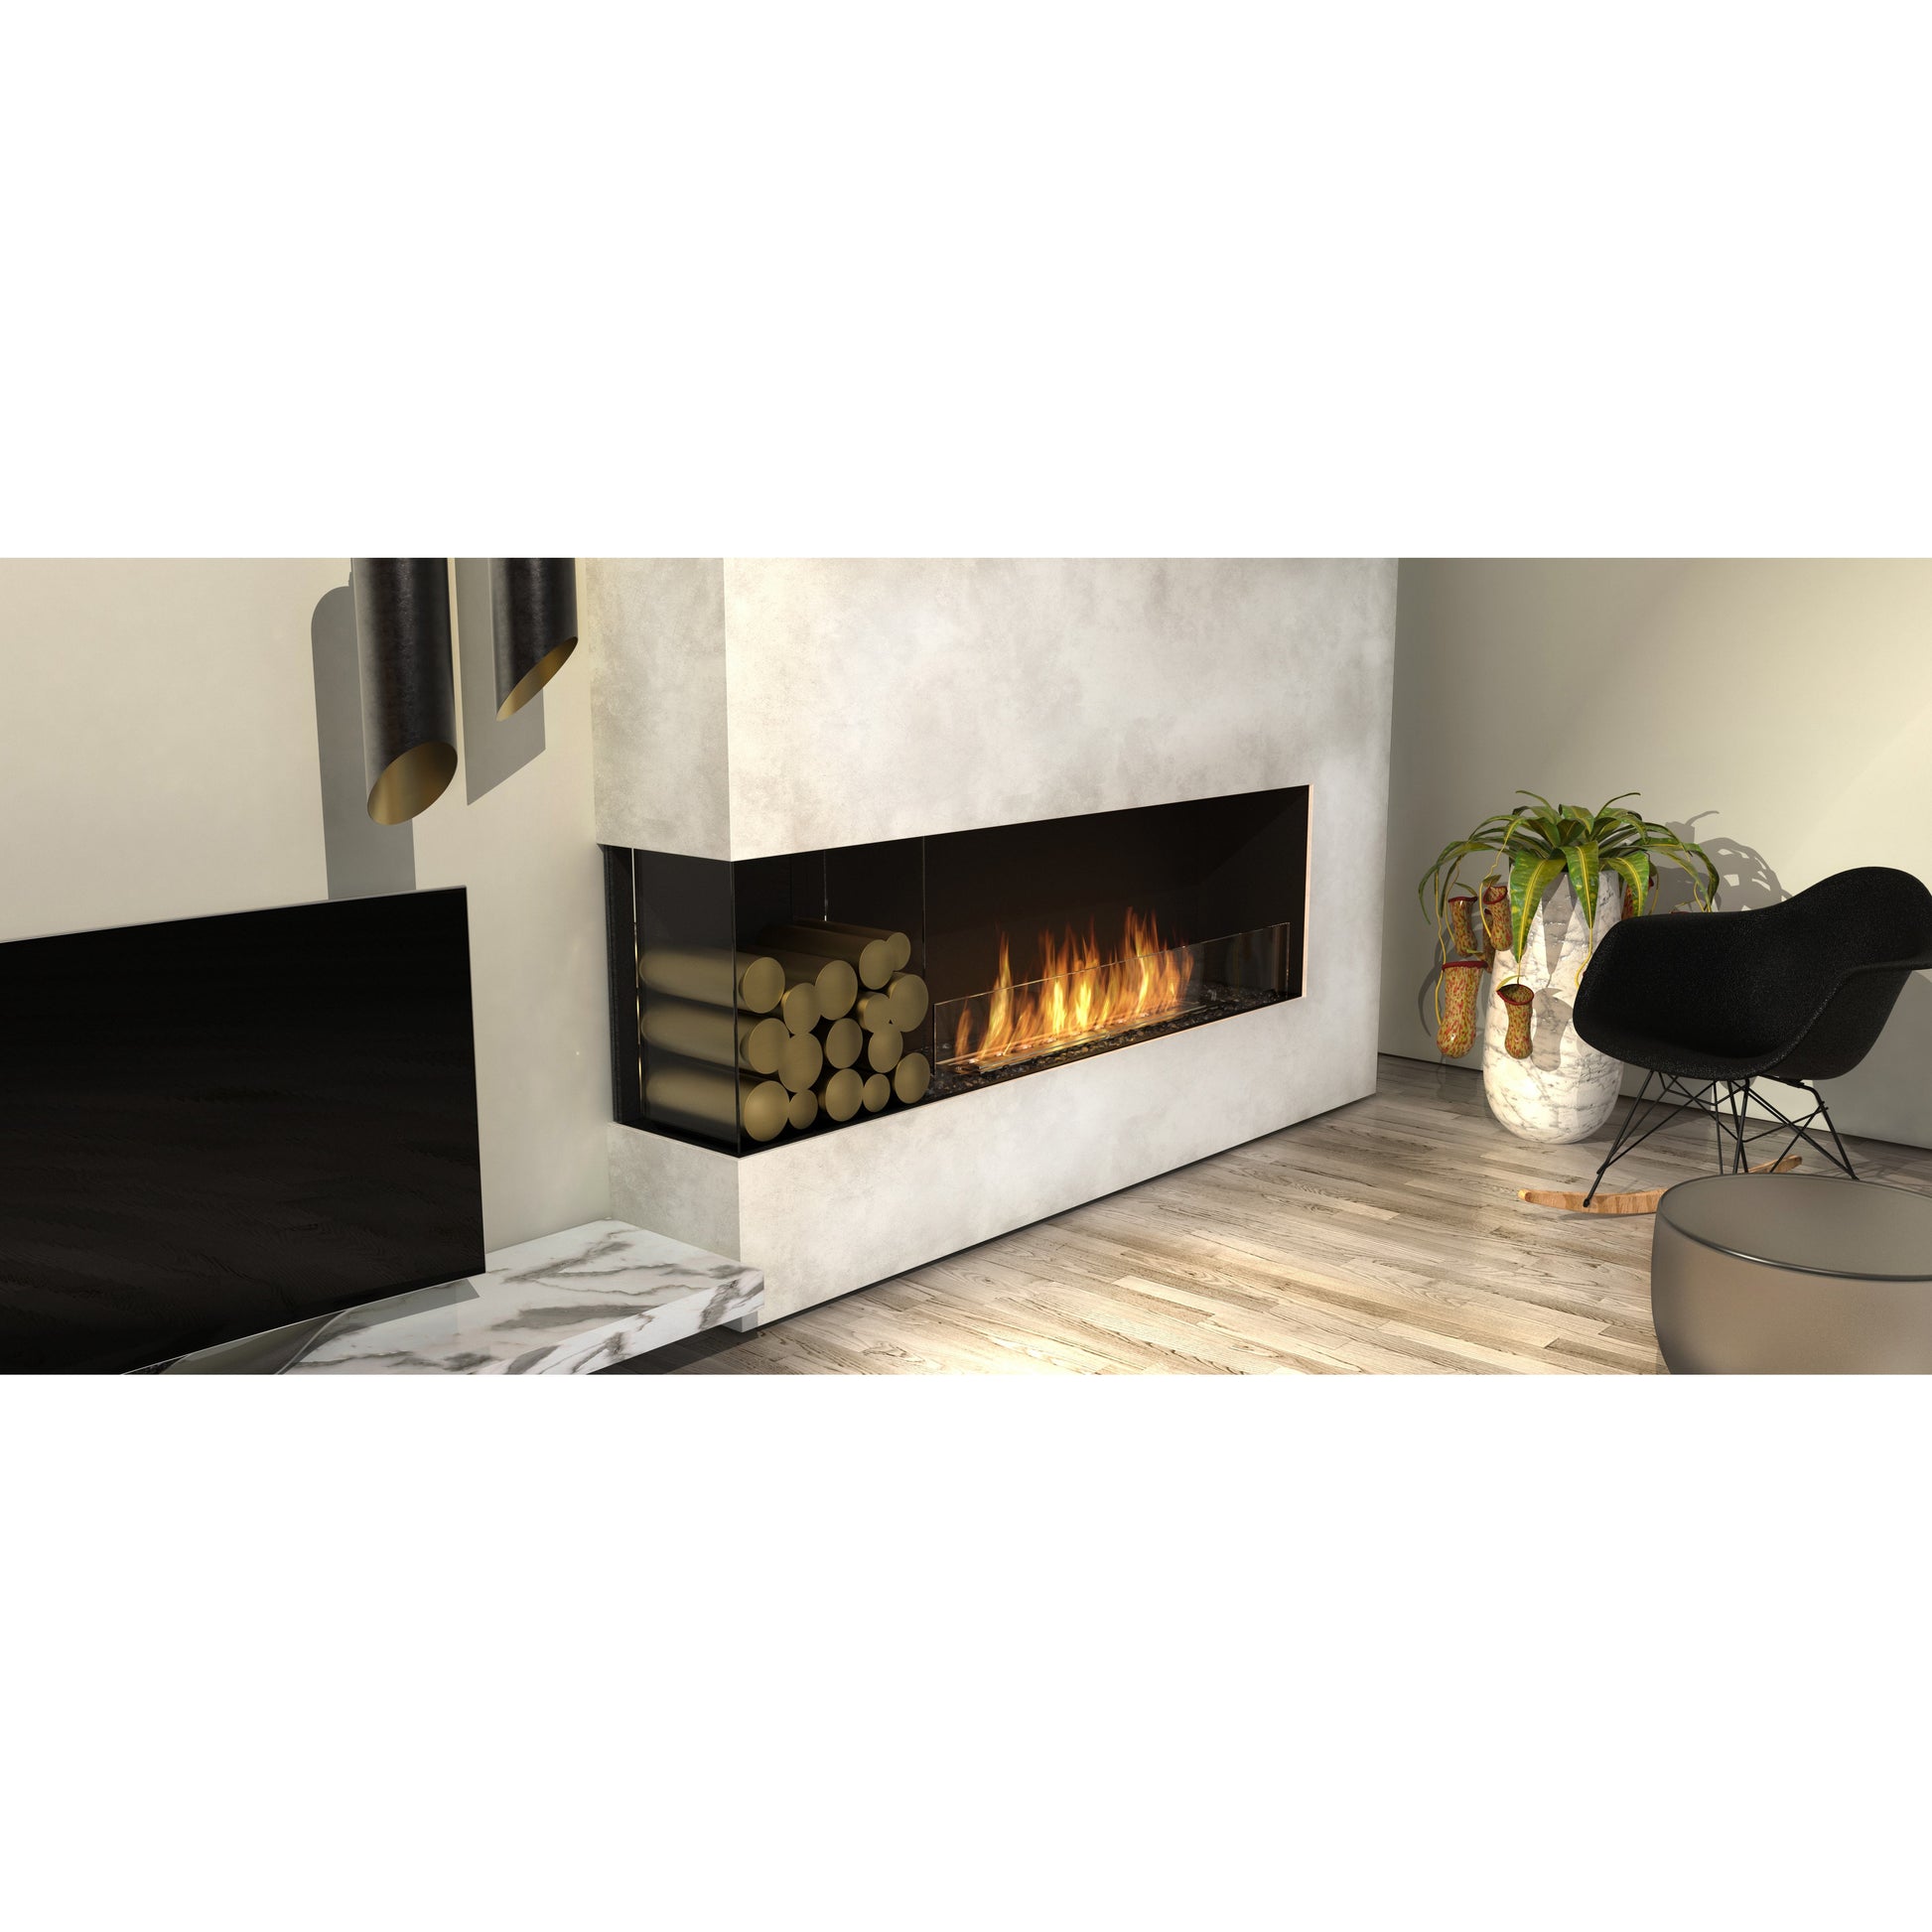 A set of 8 stainless steel decorative log sets in brass for sale. A decorative feature for the EcoSmart Flex Fireplace